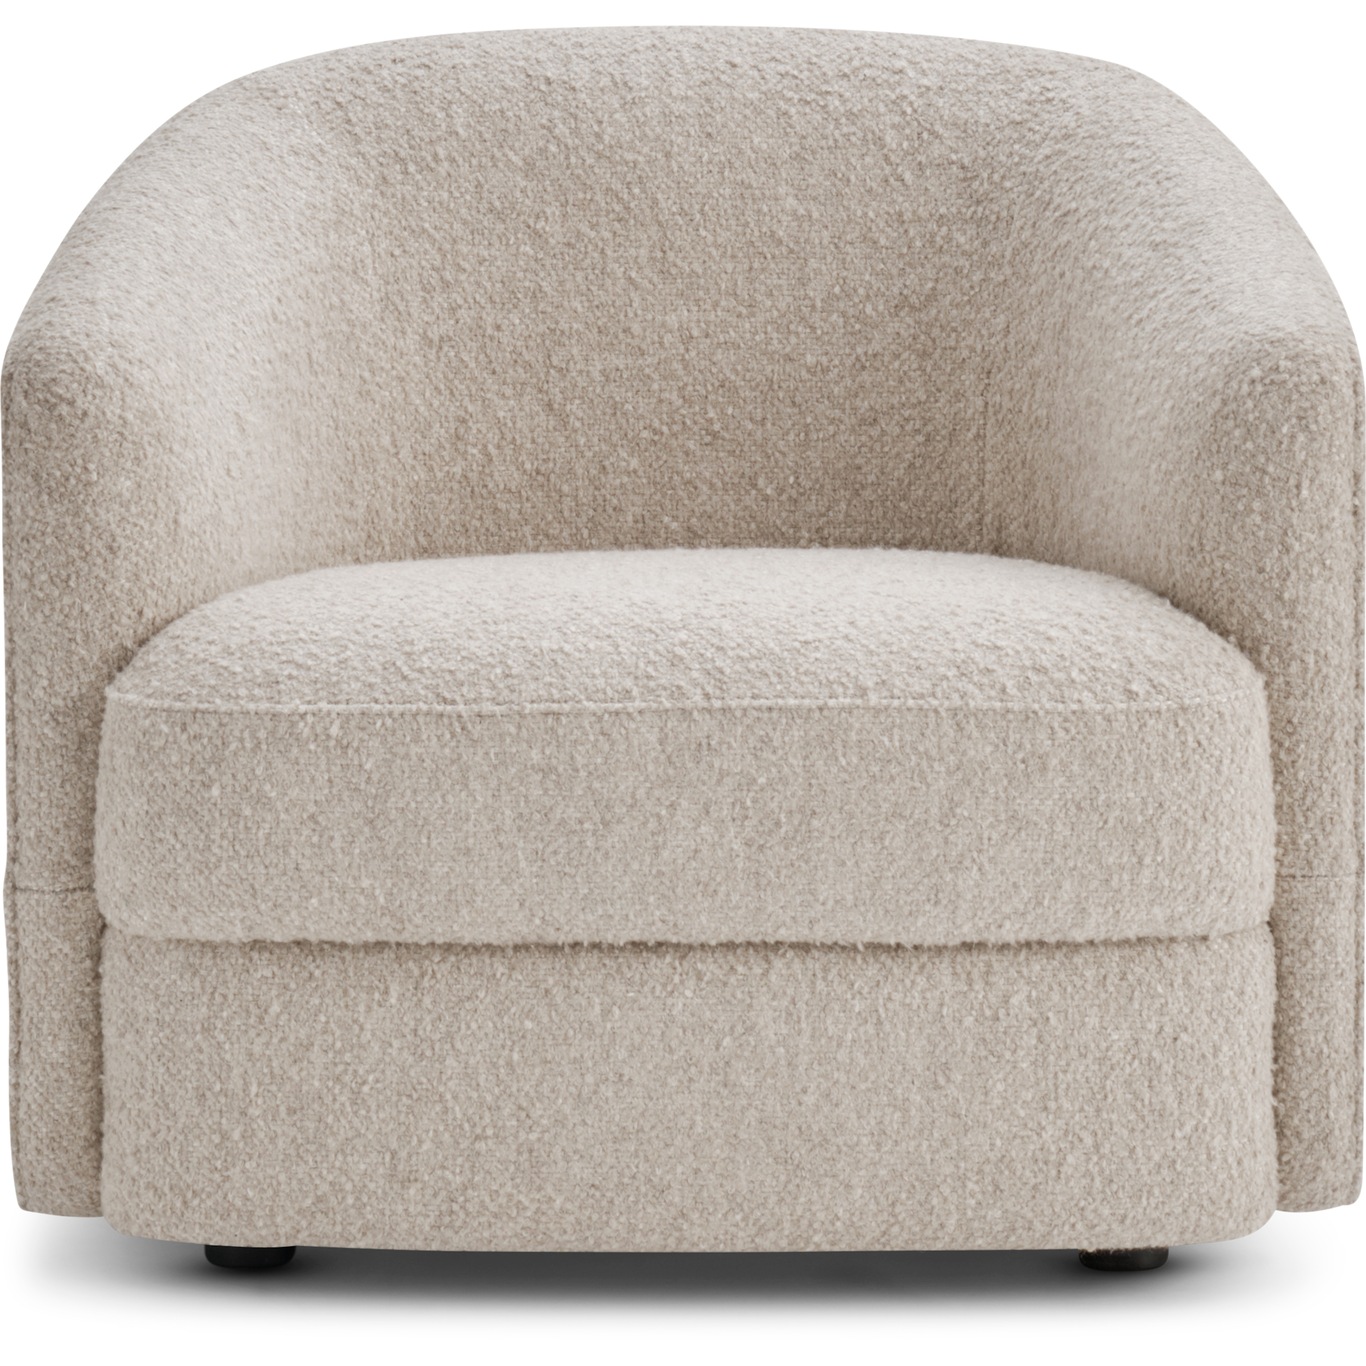 Covent Lounge Chair, Mons 3213